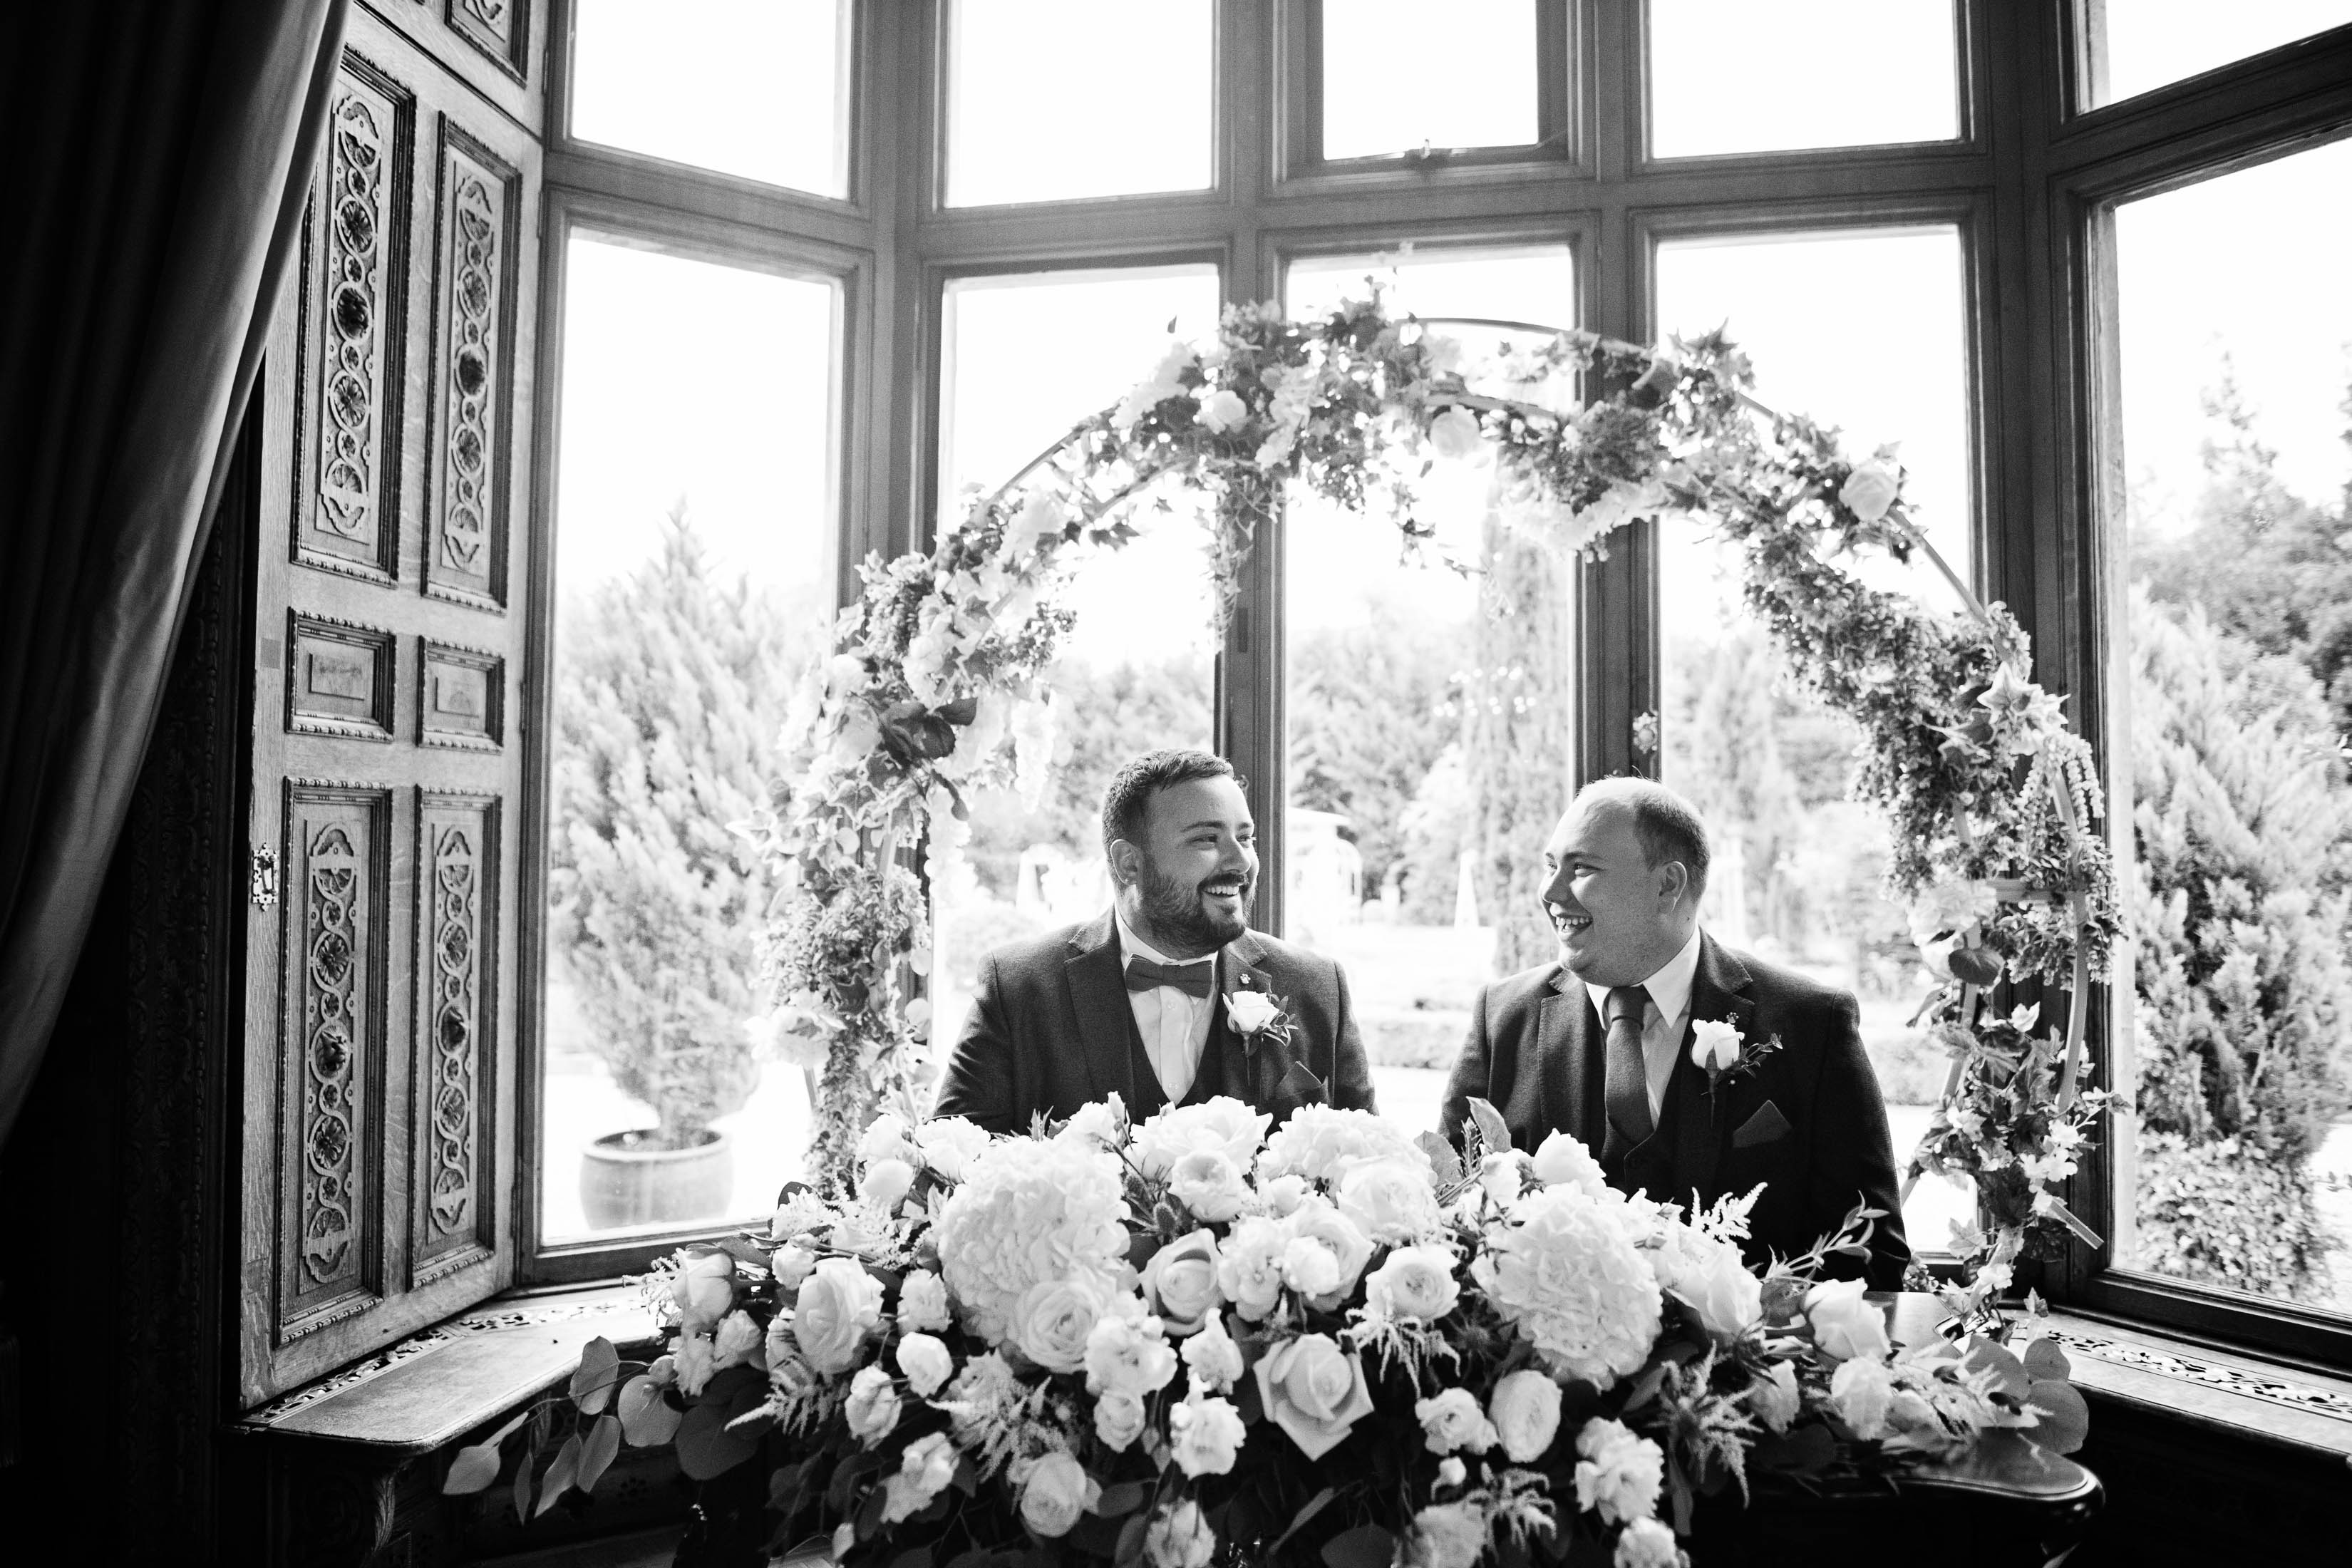 Husband and husband sit in a bay window having just signed their wedding registra. Gorgous flowers on the table in front of them and a flower arch behind them. Shot in Black & white. 